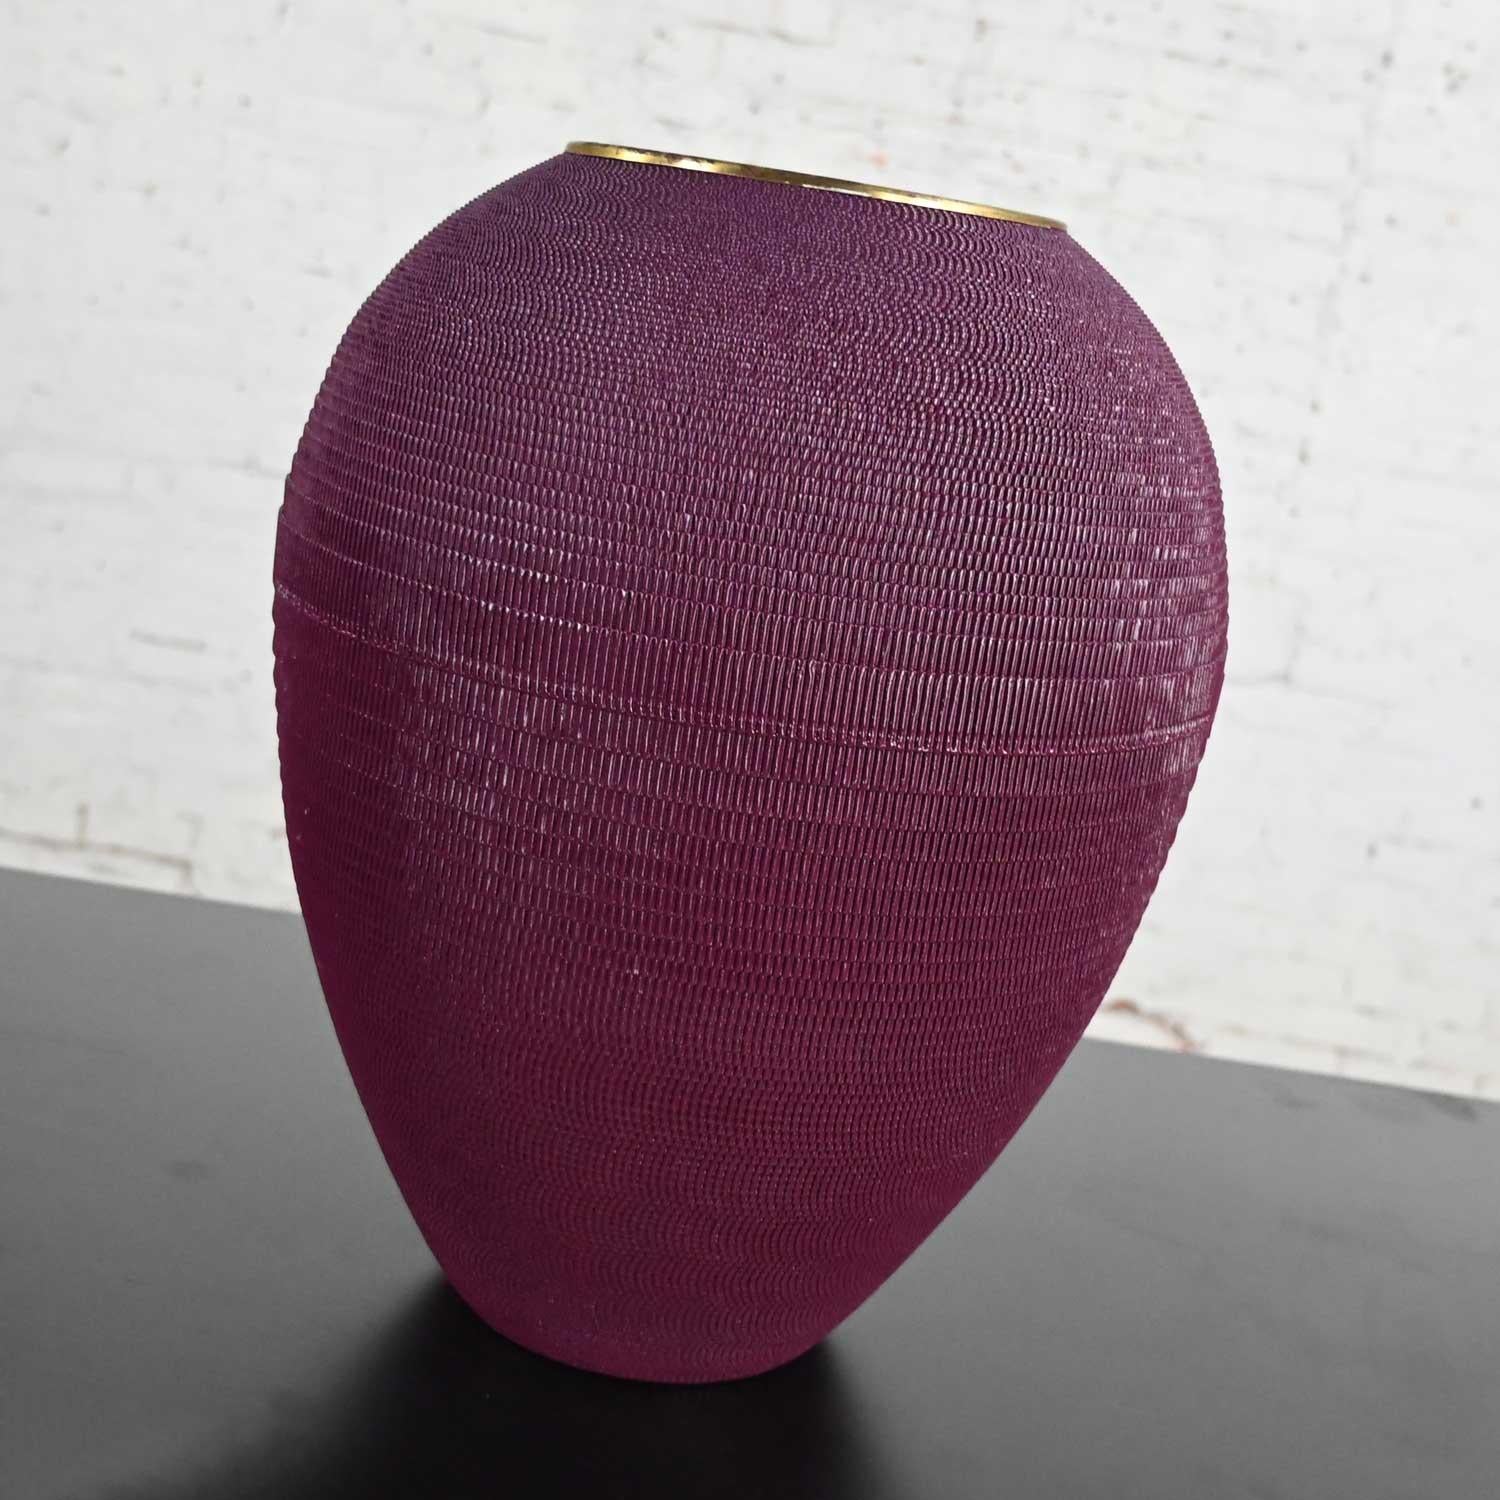 Lovely vintage modern aubergine painted corrugated cardboard large urn shaped floor vessel vase with brass plated brim in the style of Gregory Van Pelt’s Flute Lamp. Beautiful condition, keeping in mind that this is vintage and not new so will have